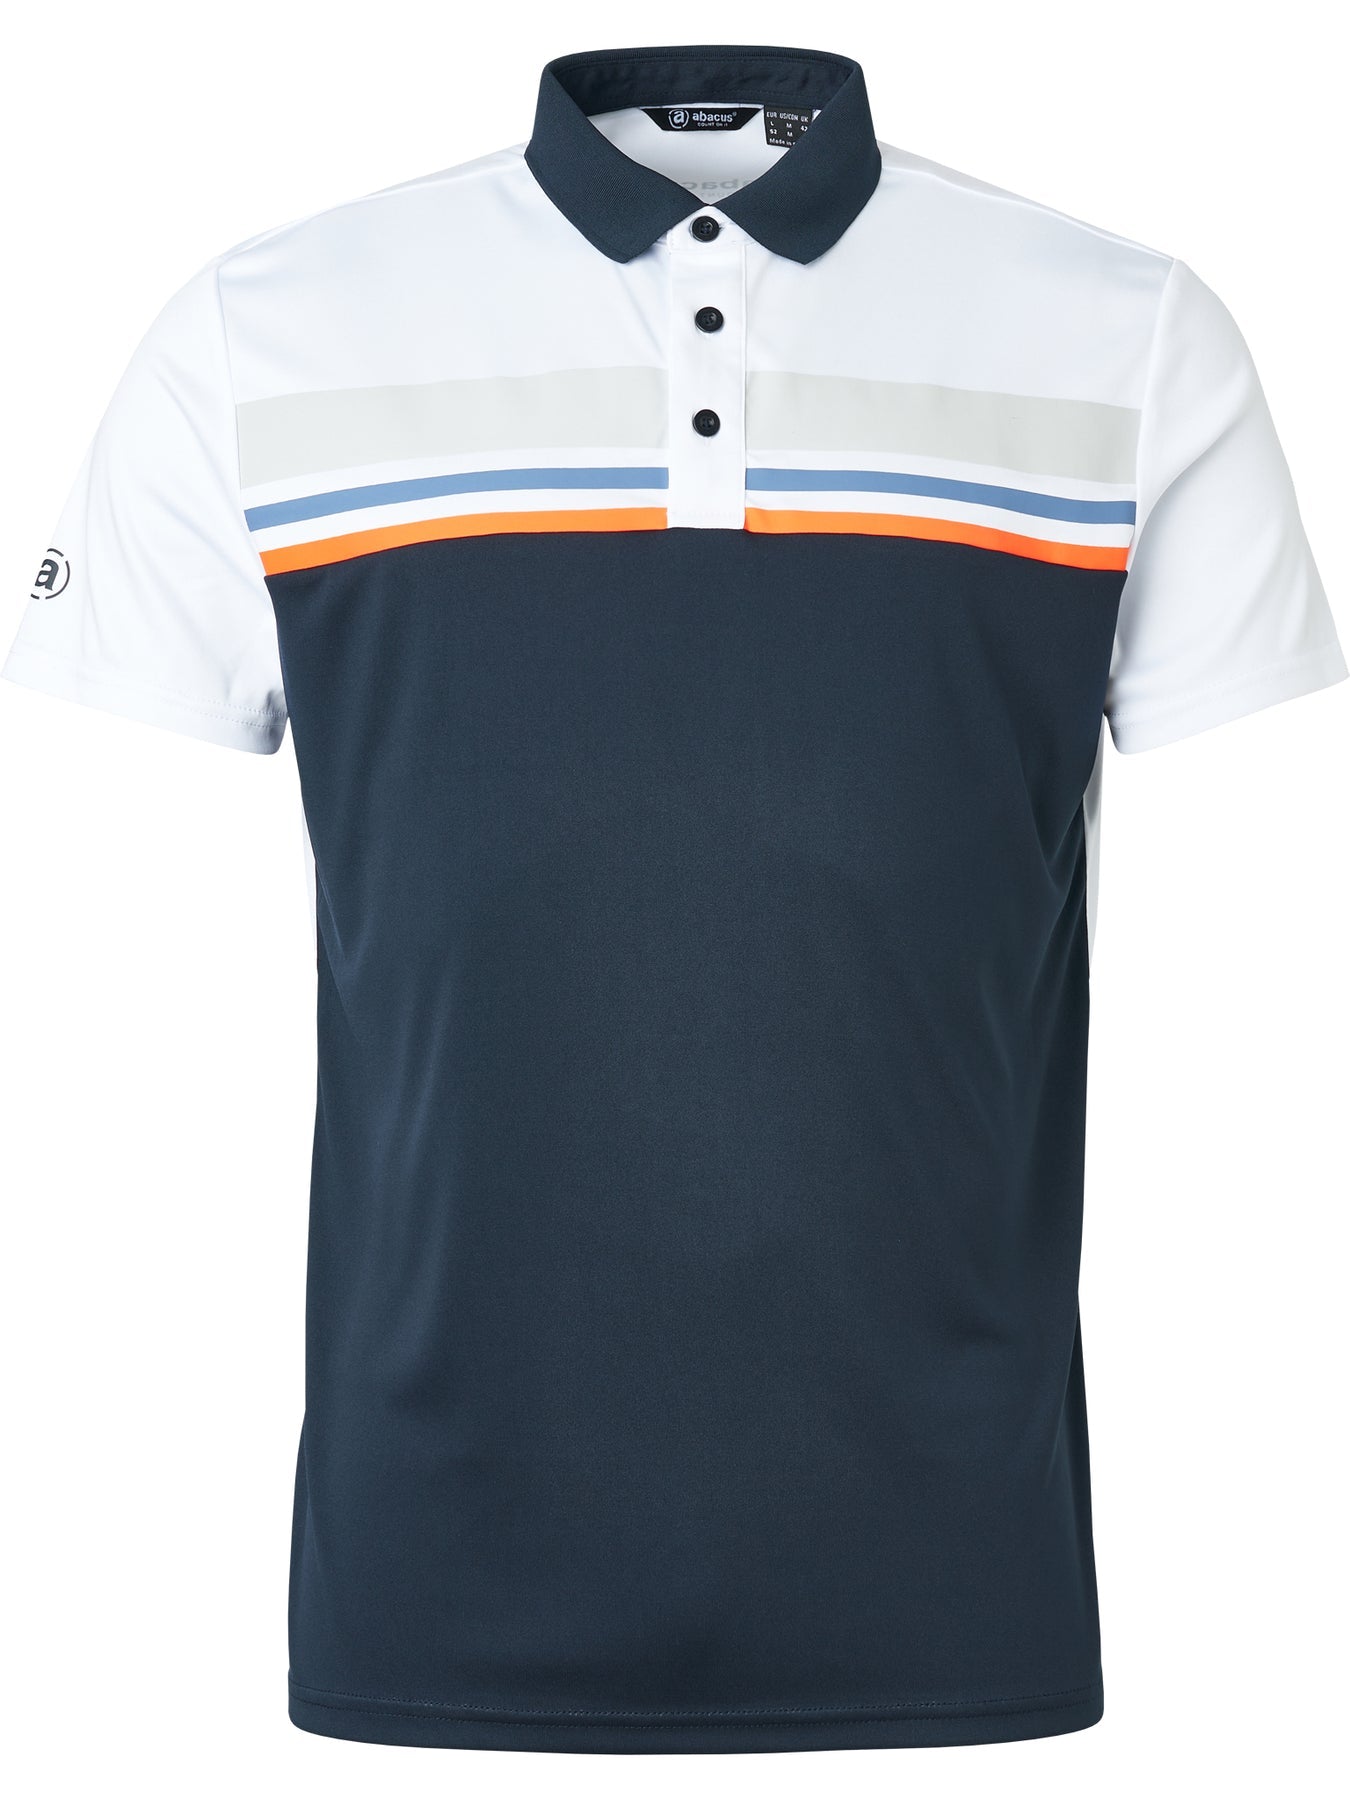 Abacus Sports Wear: Men’s High-Performance Golf Polo – Tumble